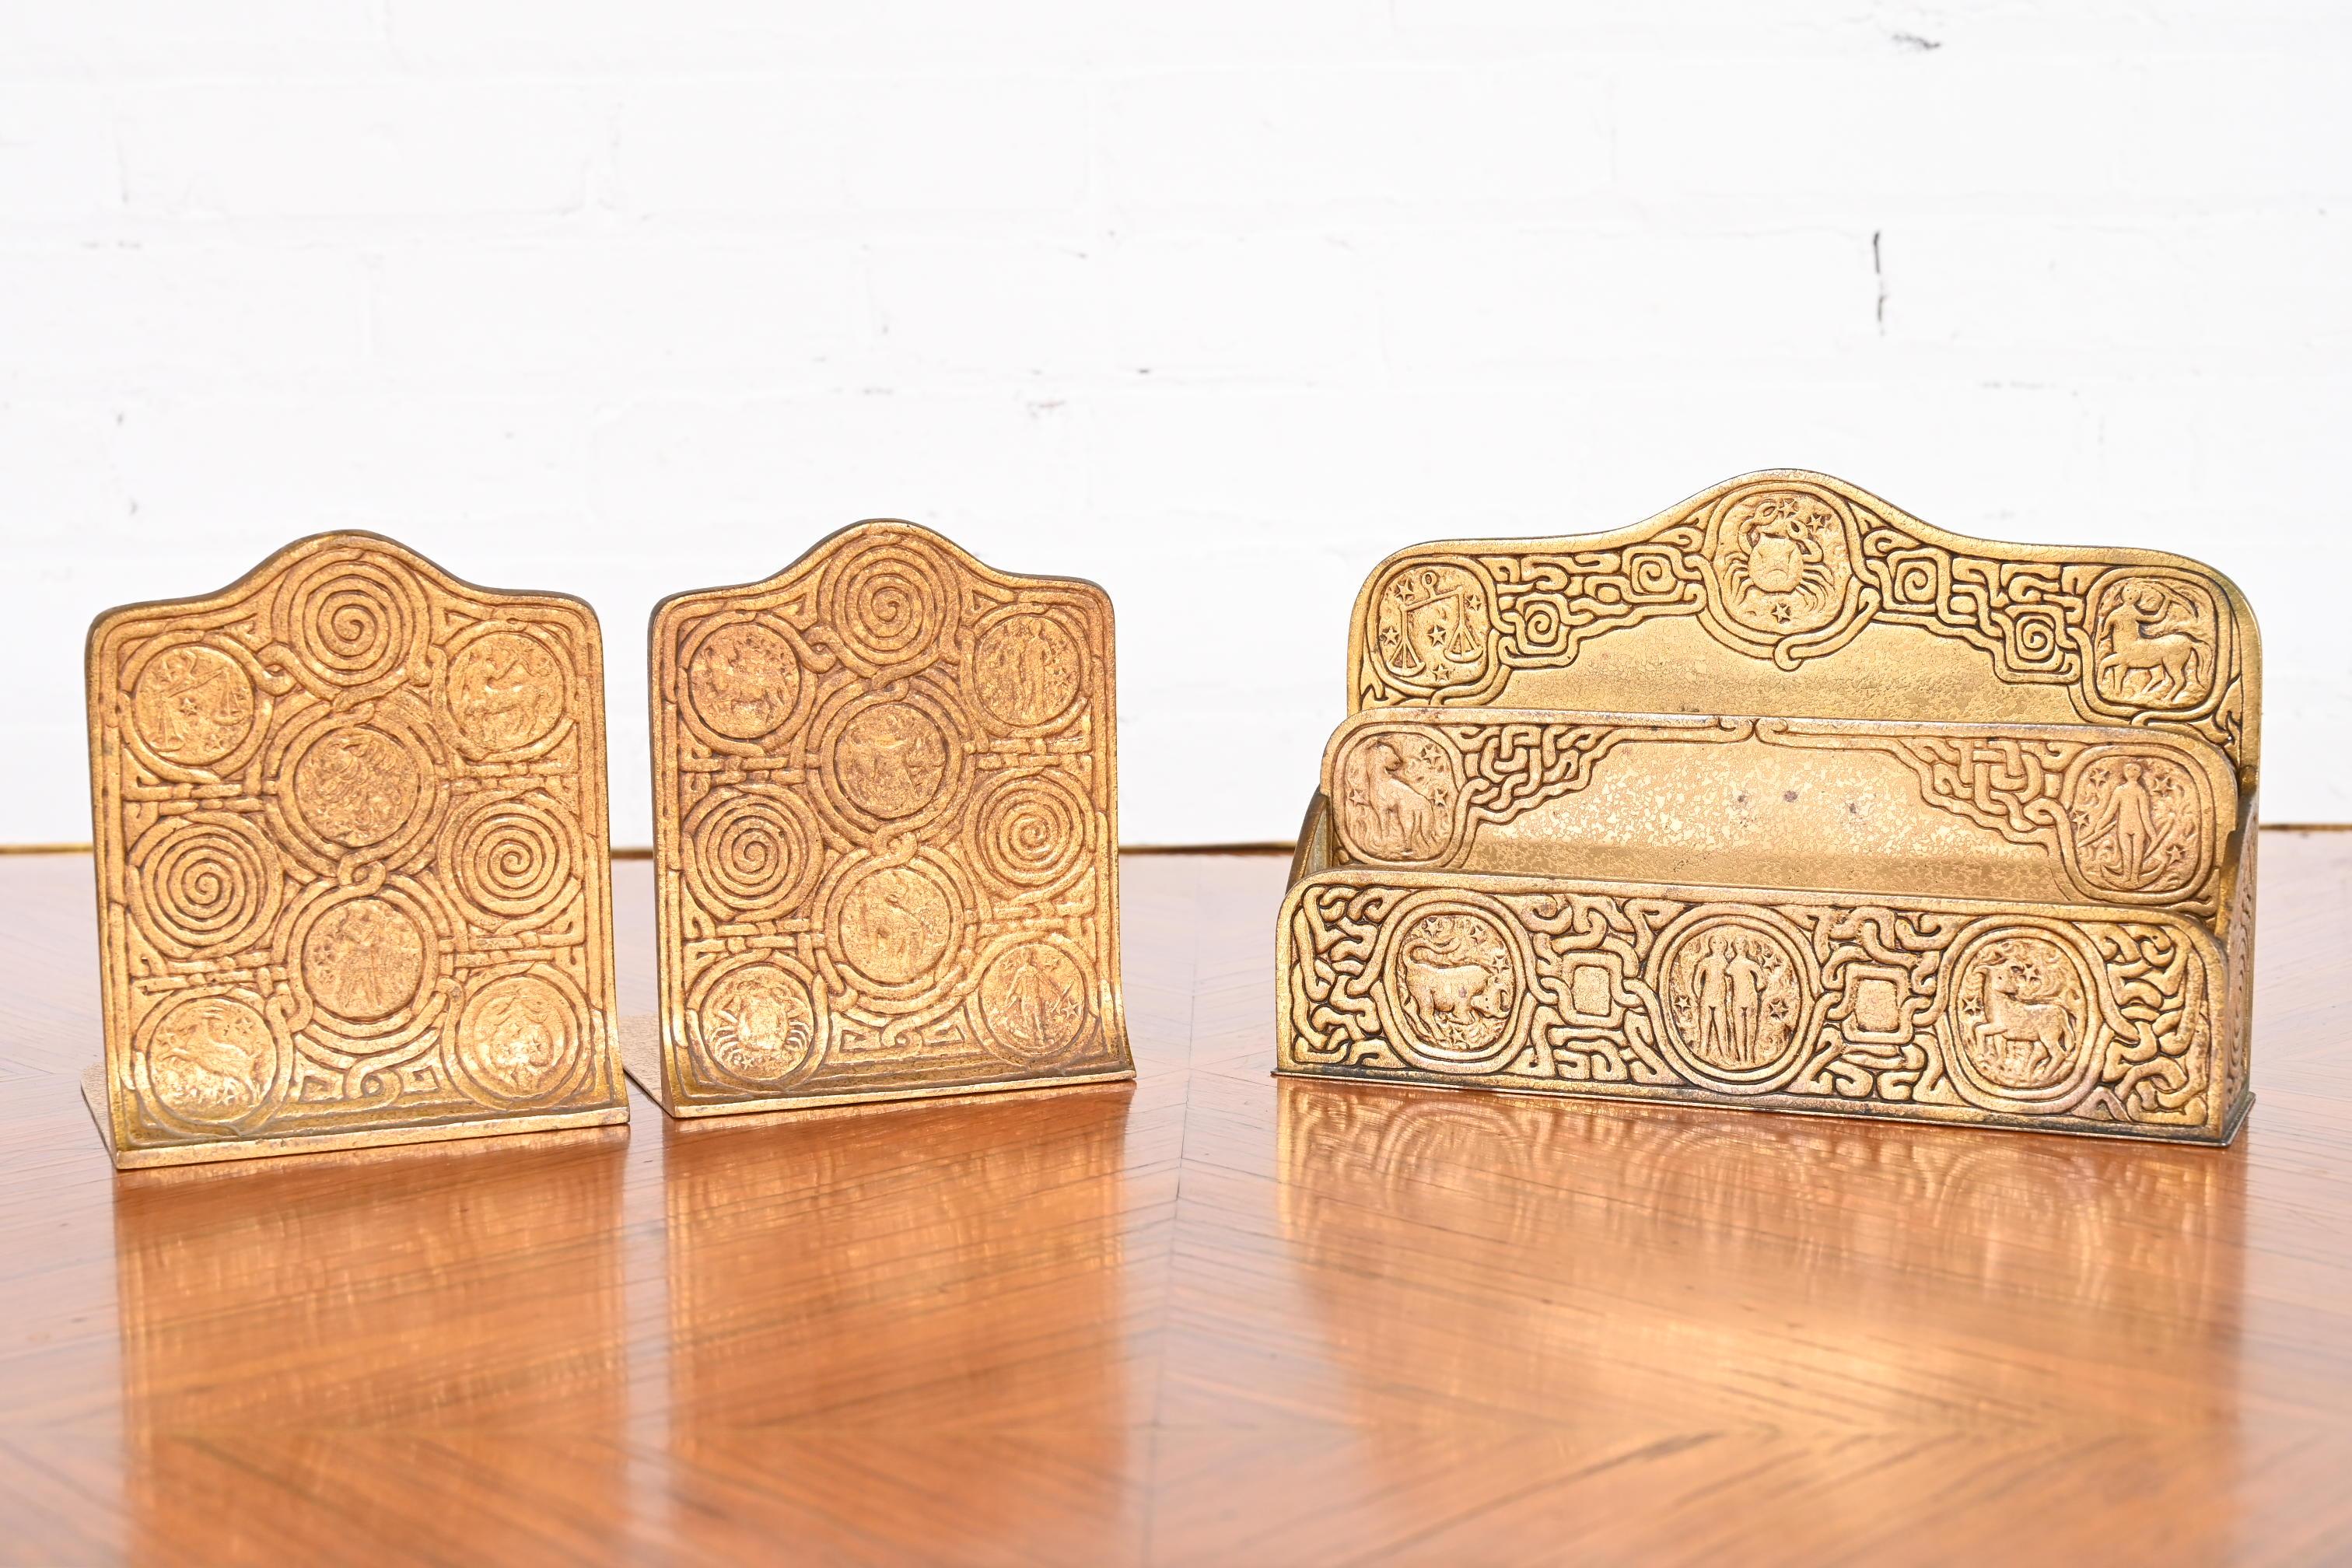 A gorgeous Art Deco period gilt bronze desk set featuring a Zodiac design. The three-piece set includes: letter rack and bookends.

By Tiffany Studios

New York, USA, early 20th century

Measures:
Letter Rack - 9.5